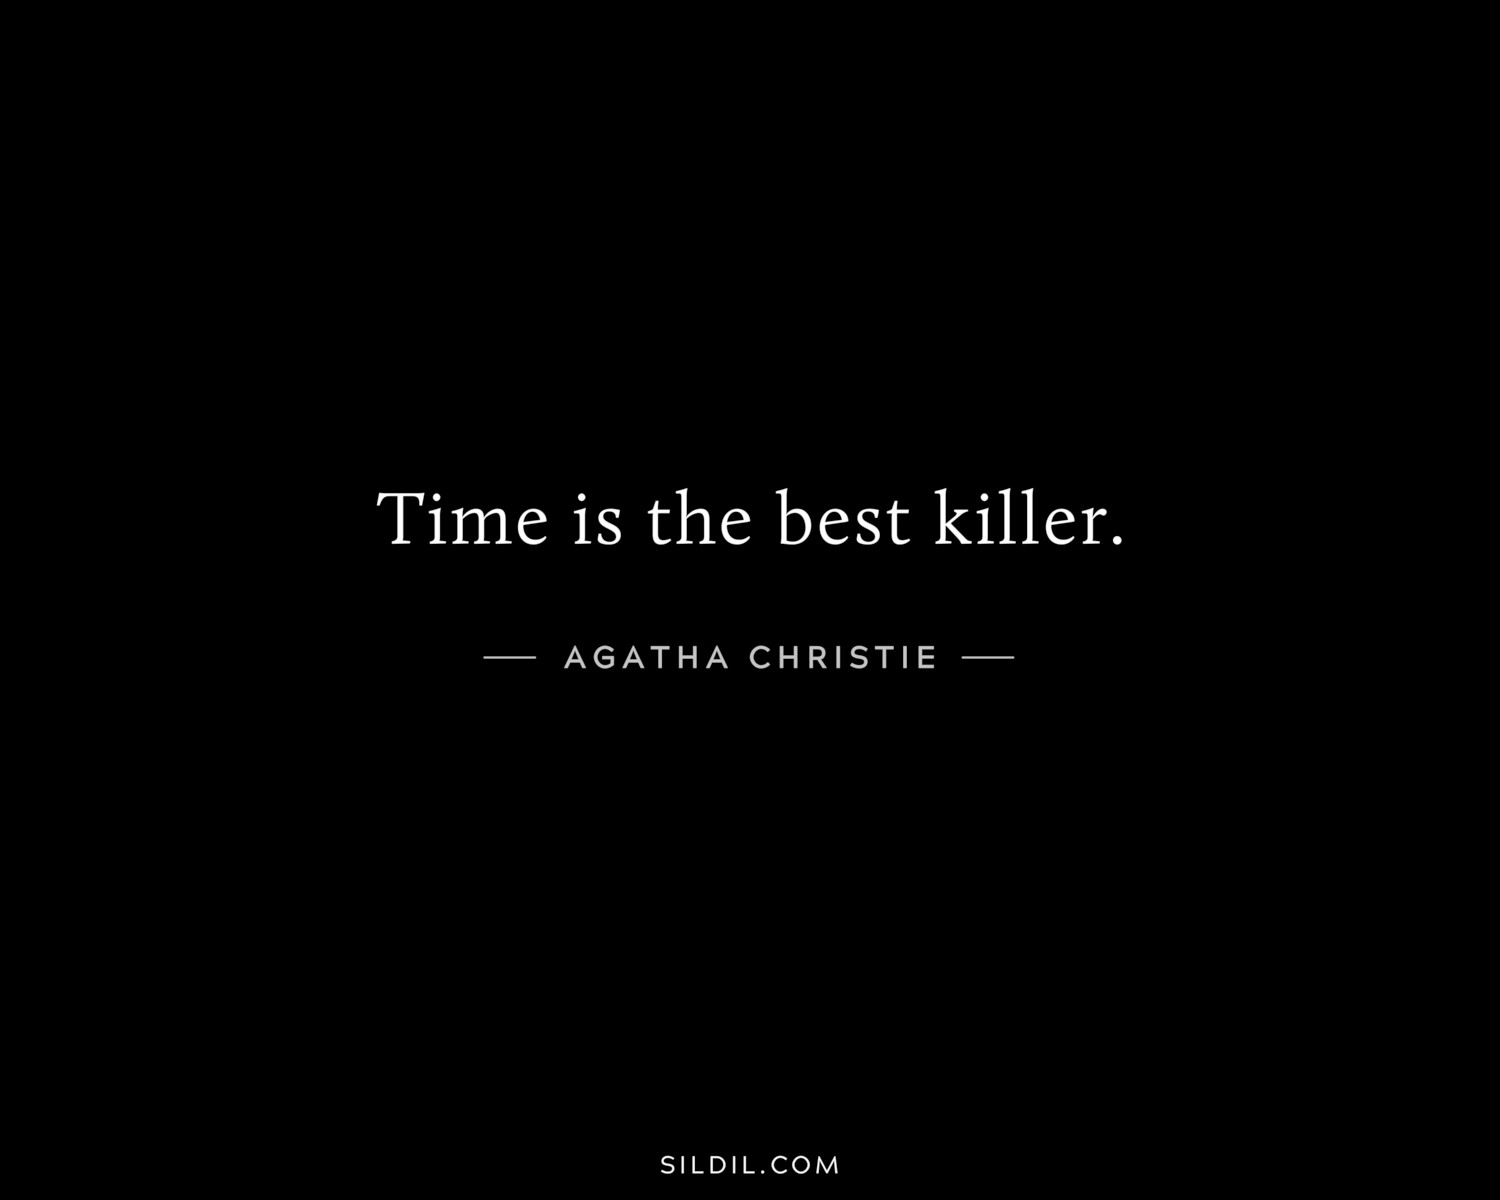 Time is the best killer.